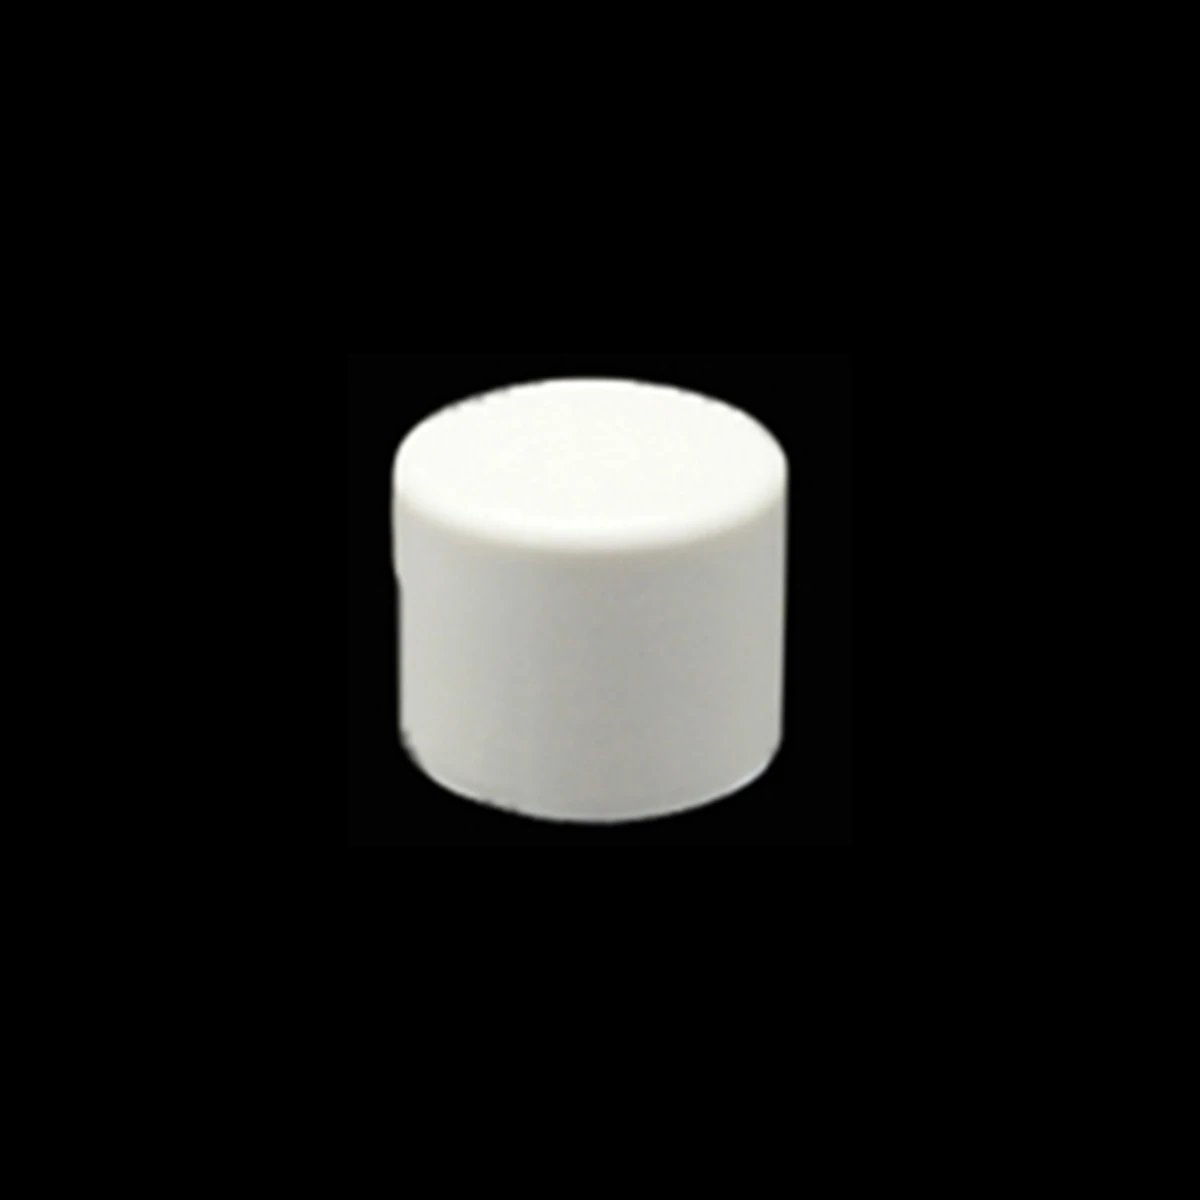 20/25/32/40mm White PVC Pipe Fittings Straight Elbow Tee Cross Connector Water Pipe Adapter 3 4 5 6 Ways Joints 